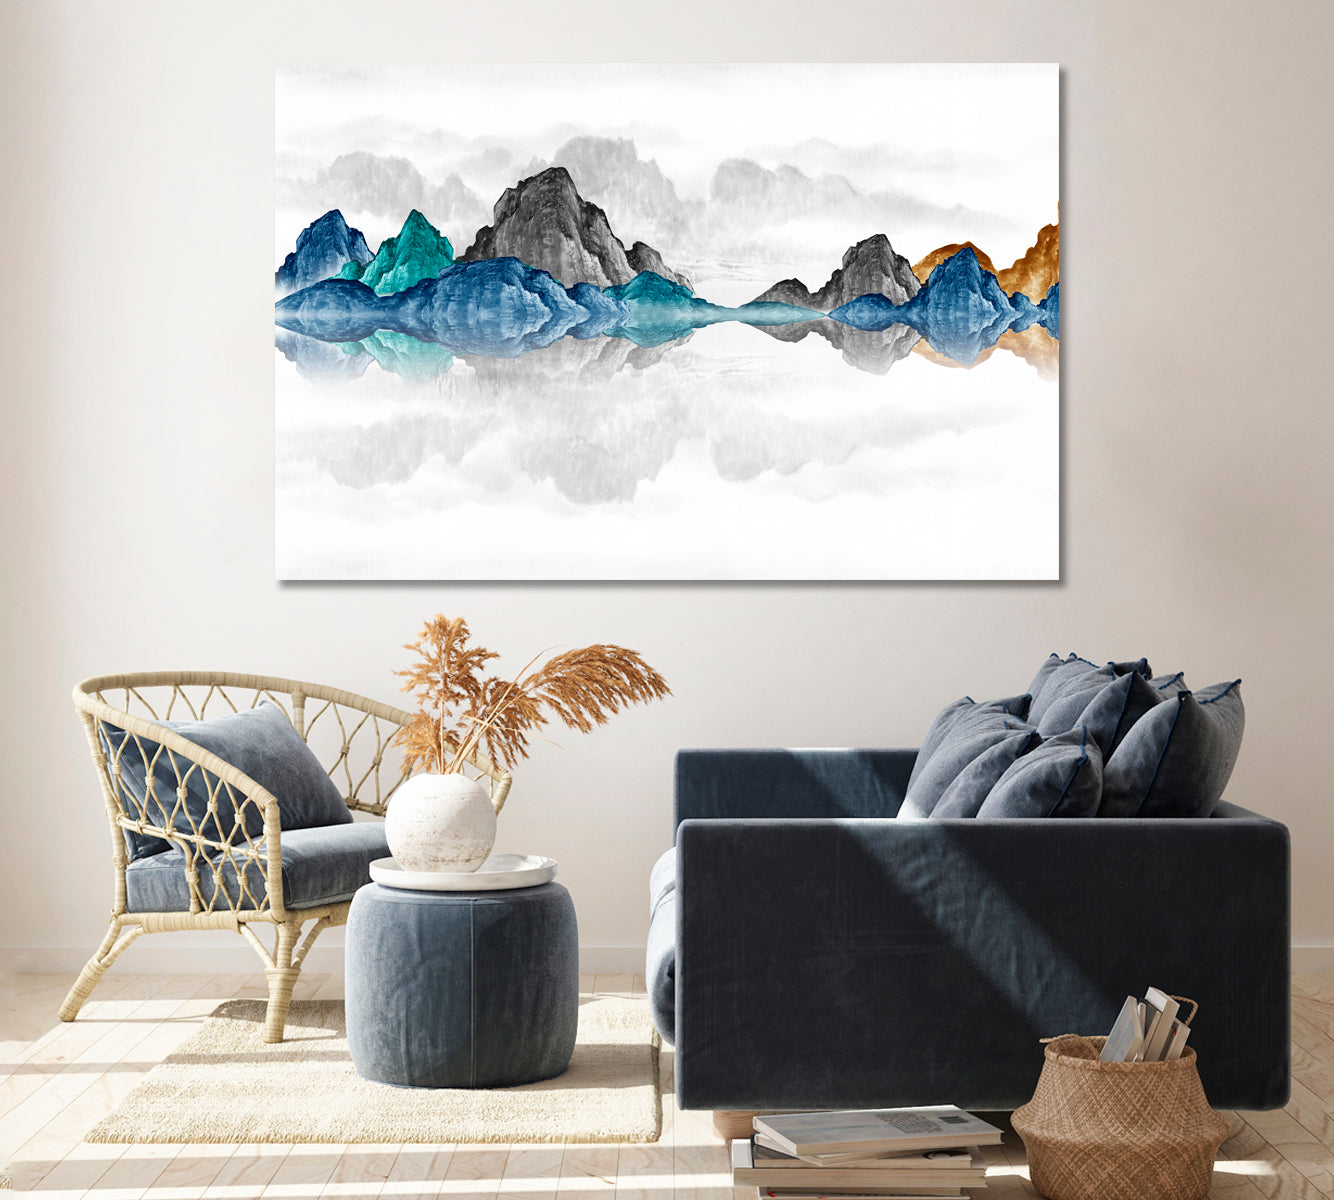 Colorful Mountain Landscape Canvas Print ArtLexy 1 Panel 24"x16" inches 